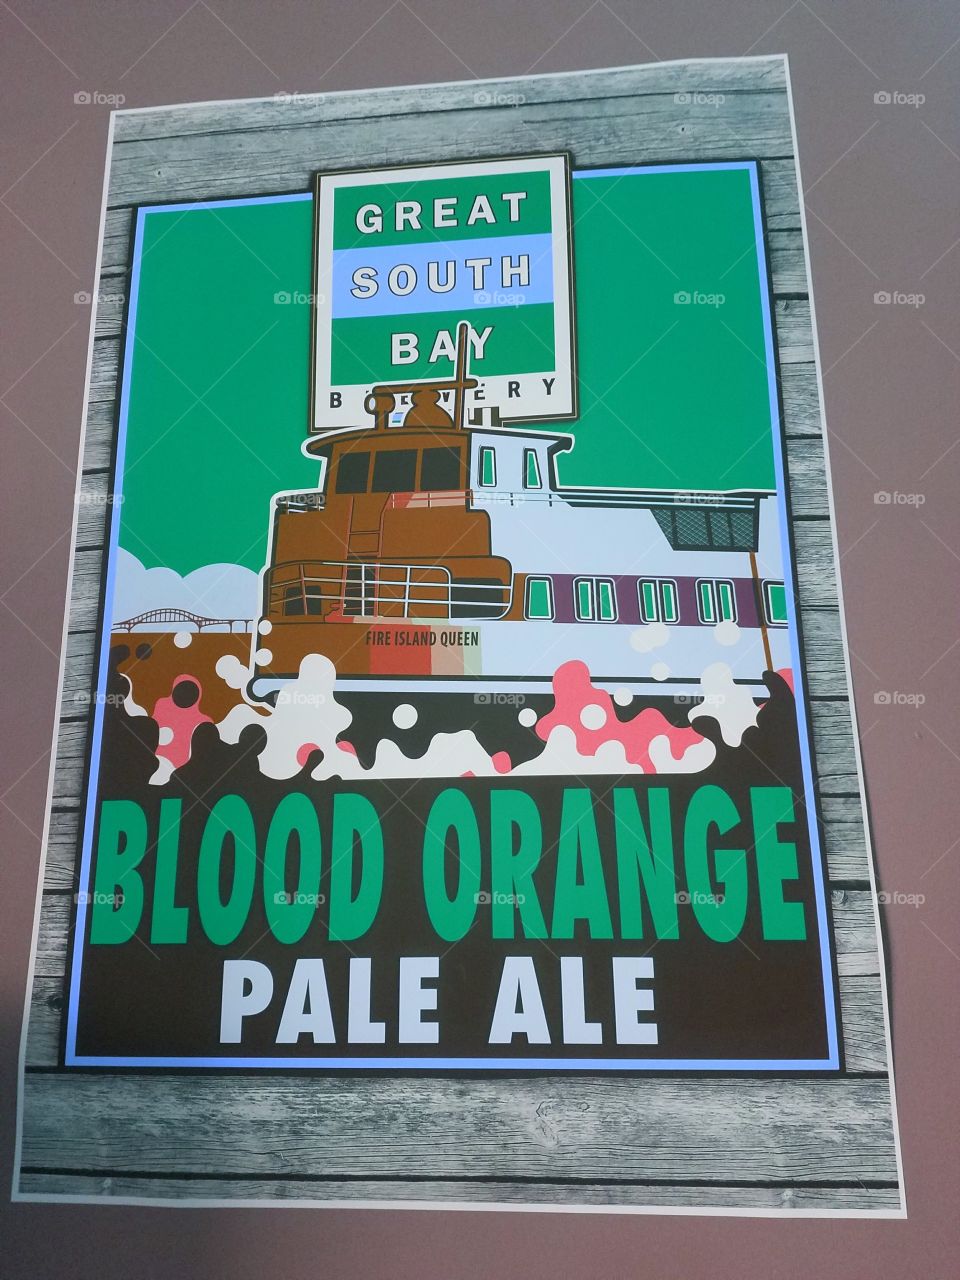 Great South Bay Brewery Blood Orange Pale Ale Advertisement